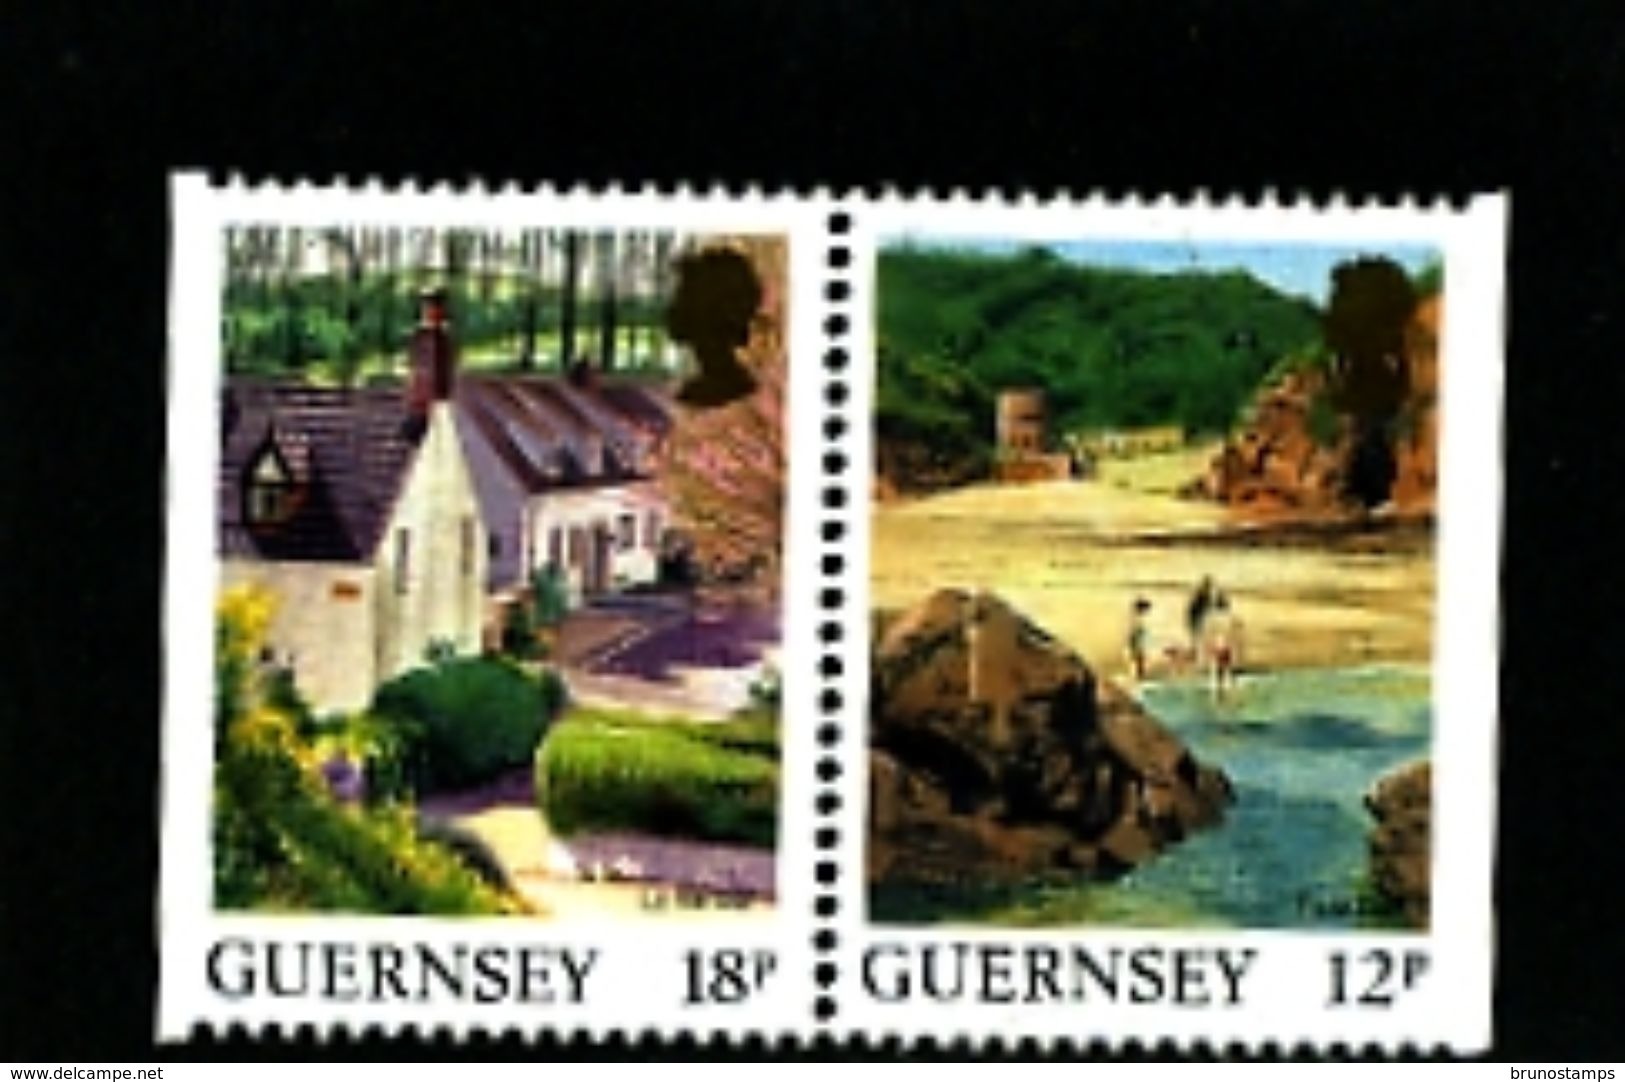 GUERNSEY - 1989  VIEWS  12p +18p  PAIR  EX BOOKLET  IMPERF  SIDES  MINT NH - Guernesey